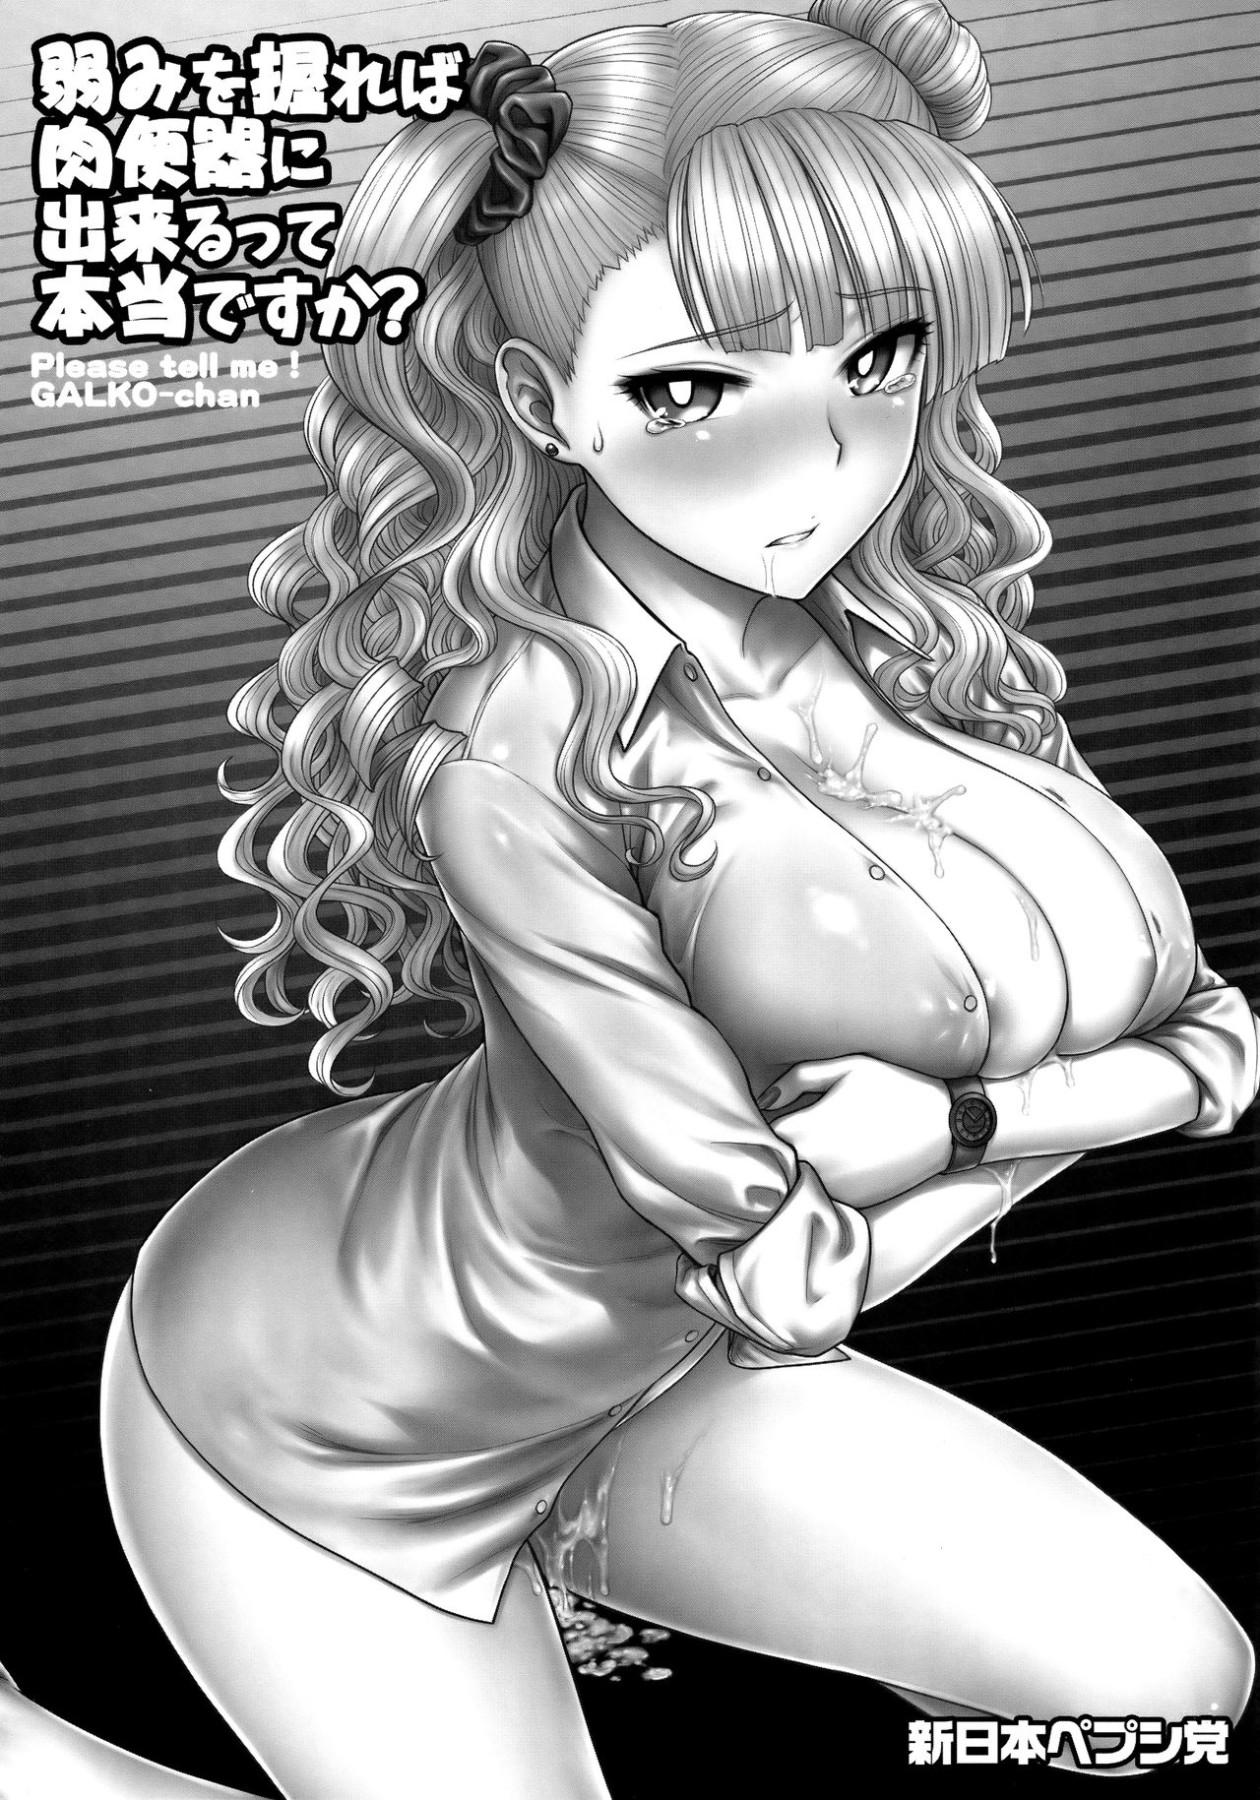 hentai manga Can You Make Her a Slut By Attacking Her Weakness?